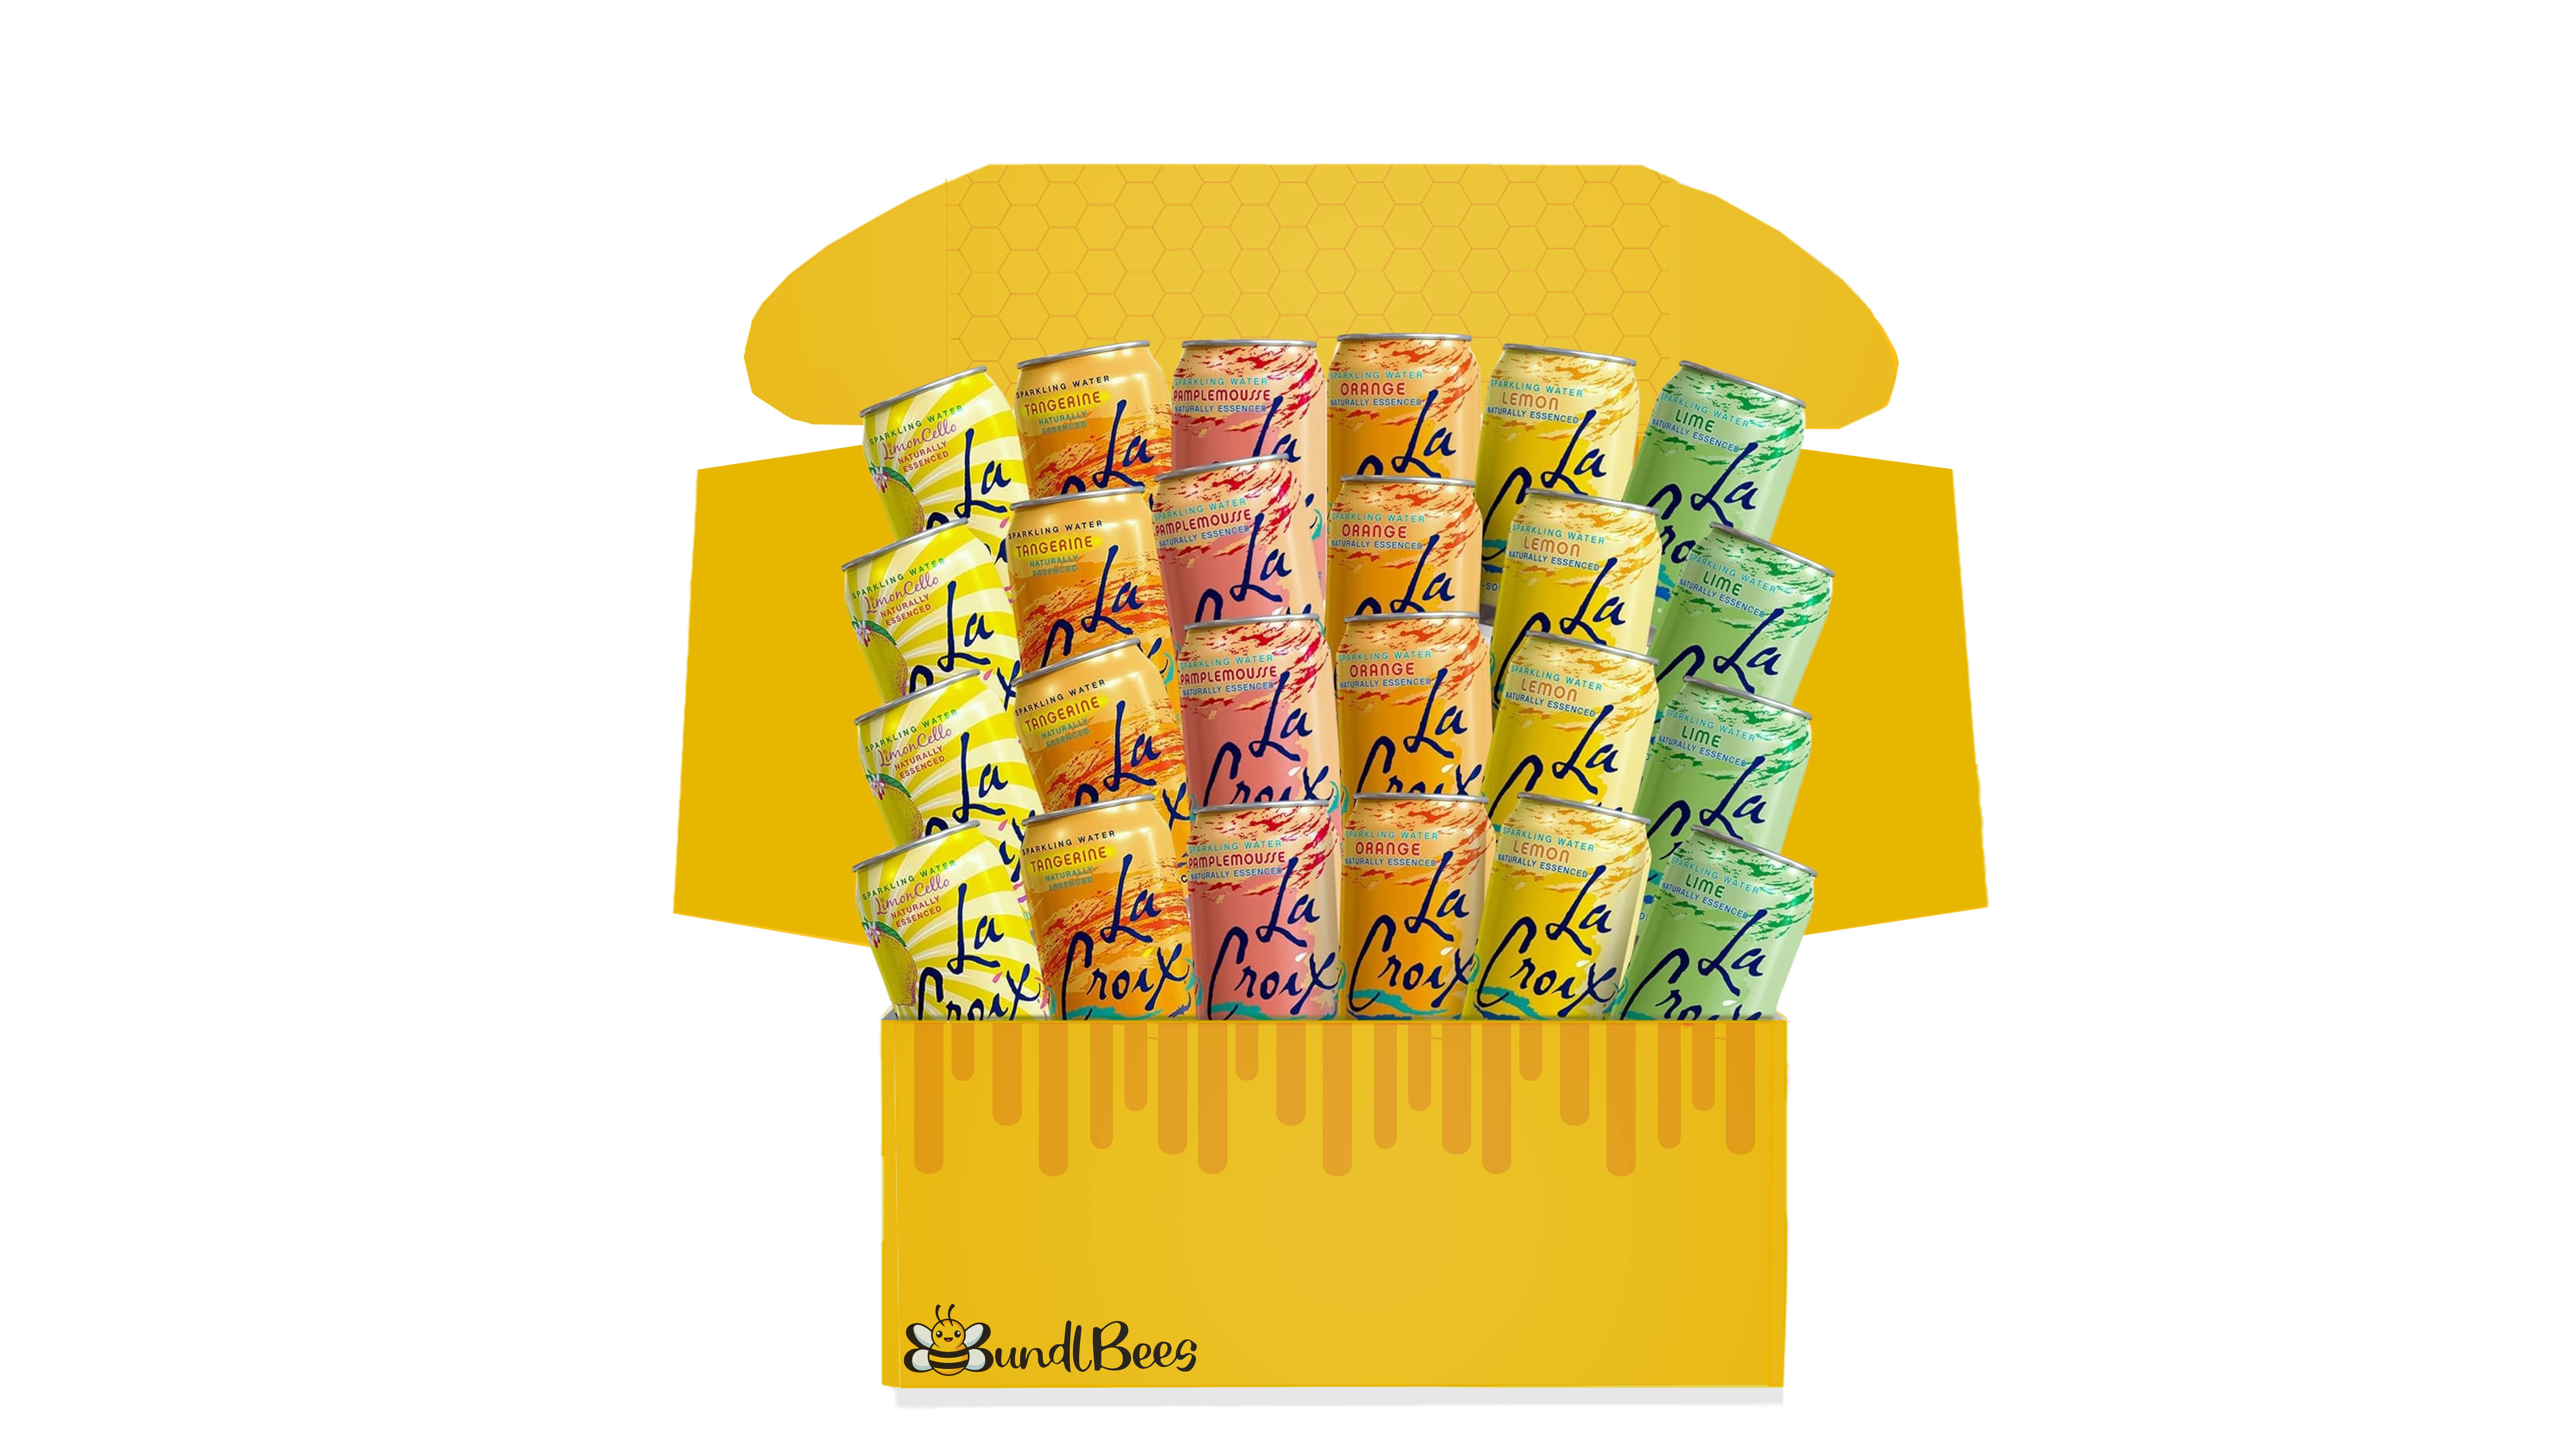 Picture of LaCroix product